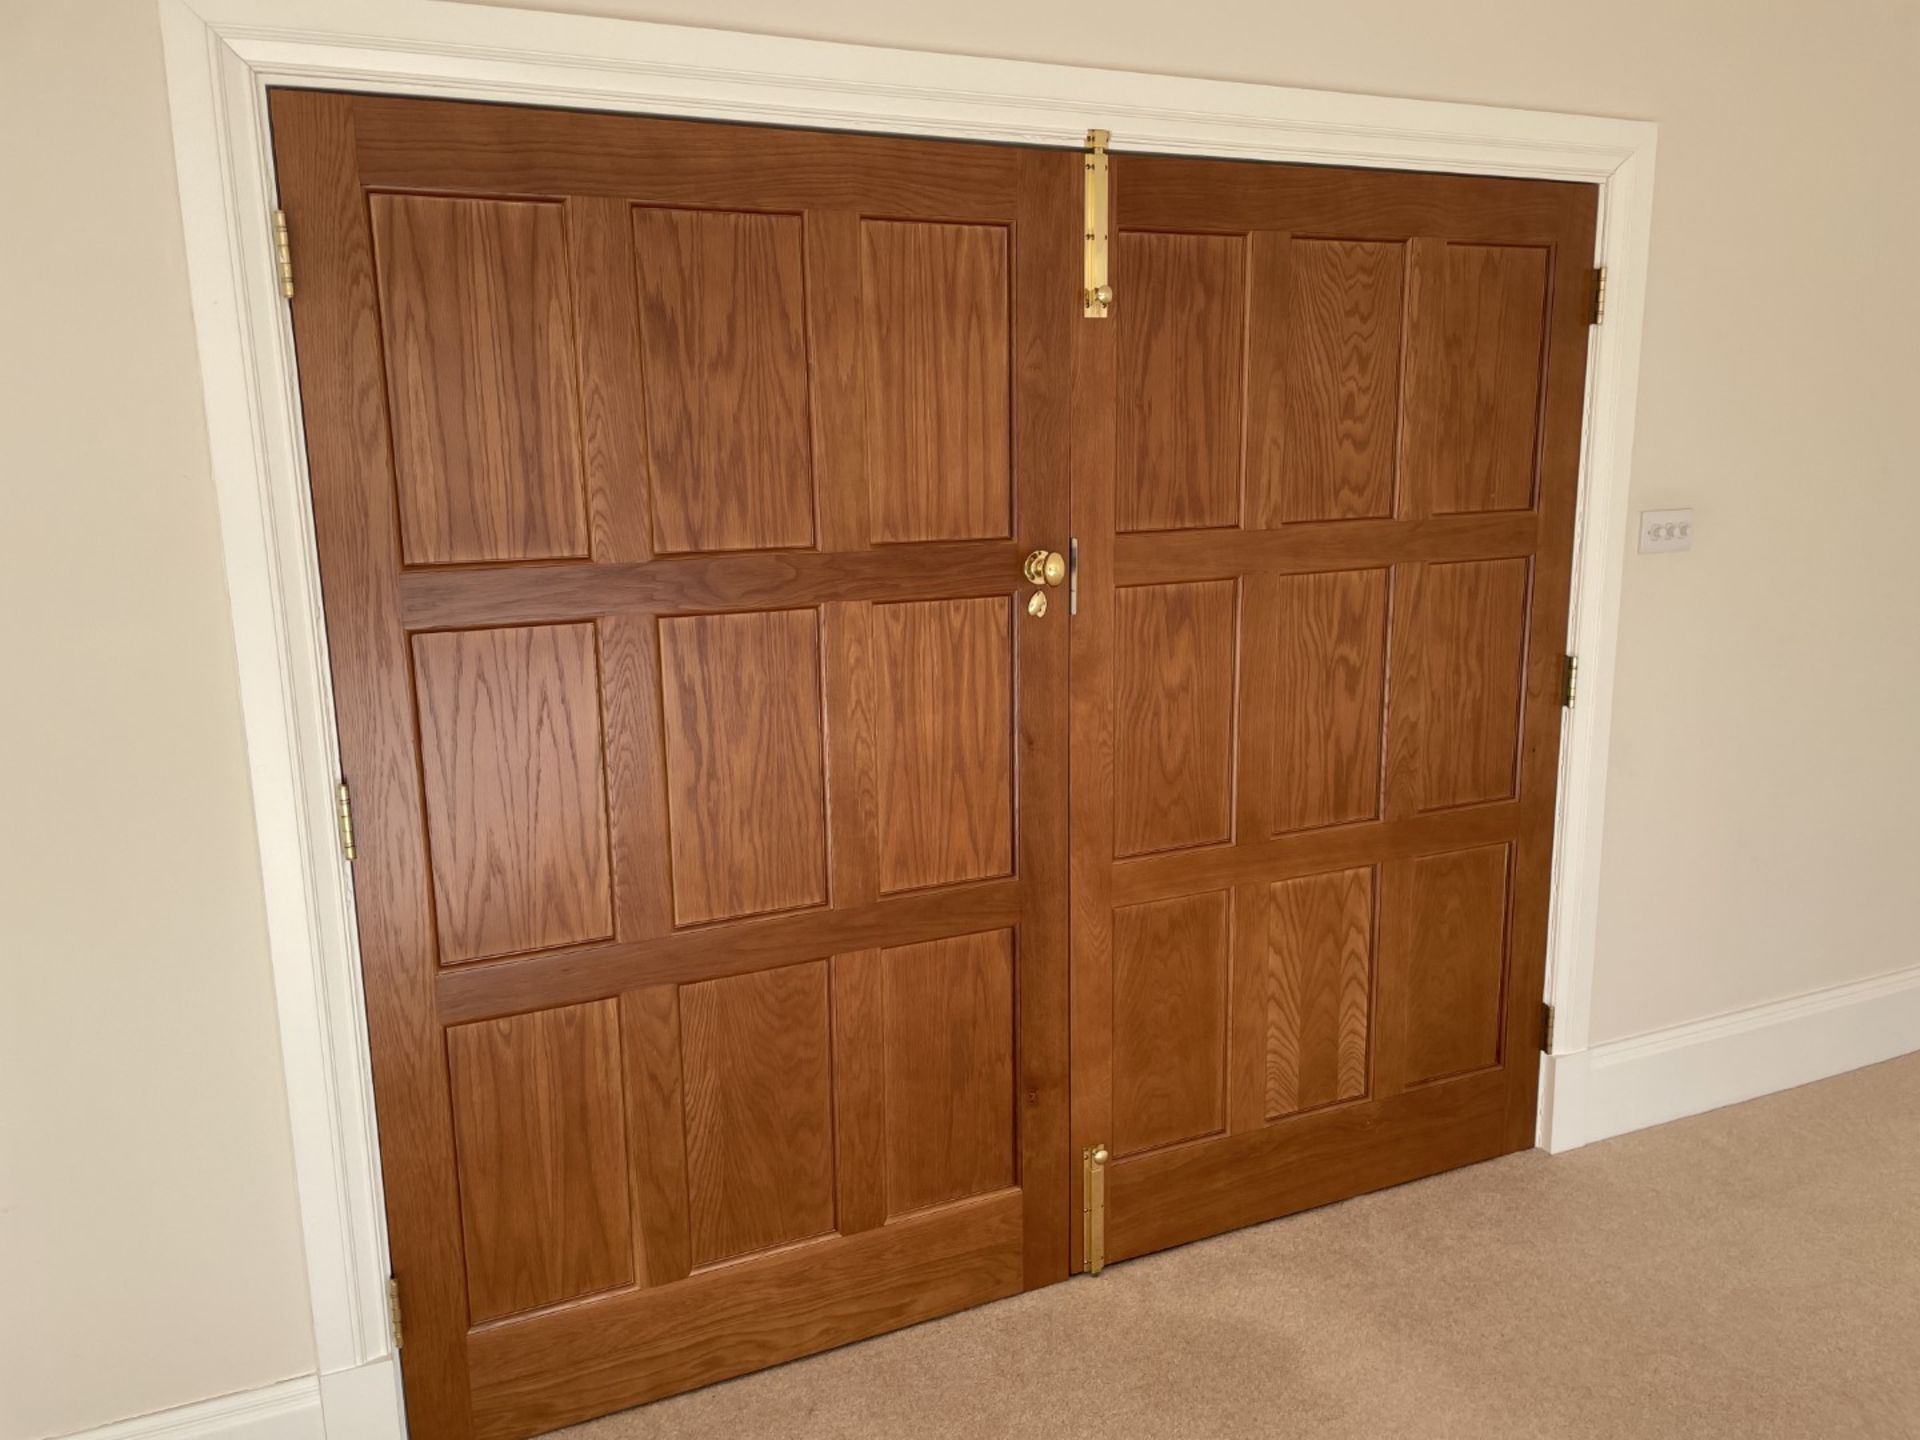 1 x Set of Stately Solid Wood Double Doors - Image 19 of 21